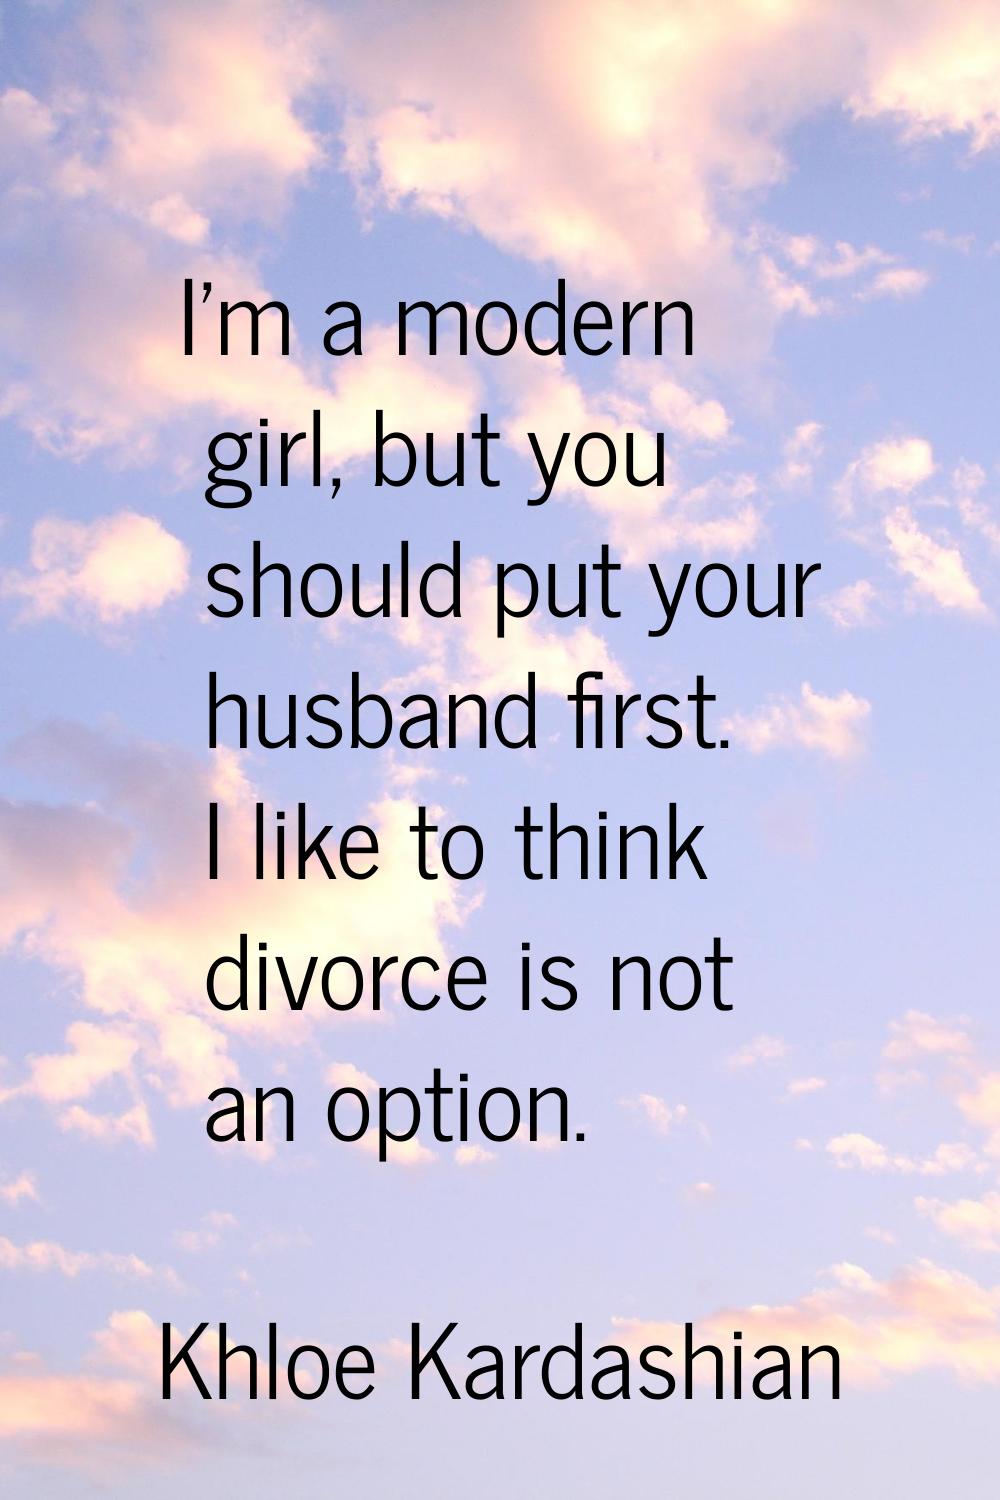 I'm a modern girl, but you should put your husband first. I like to think divorce is not an option.